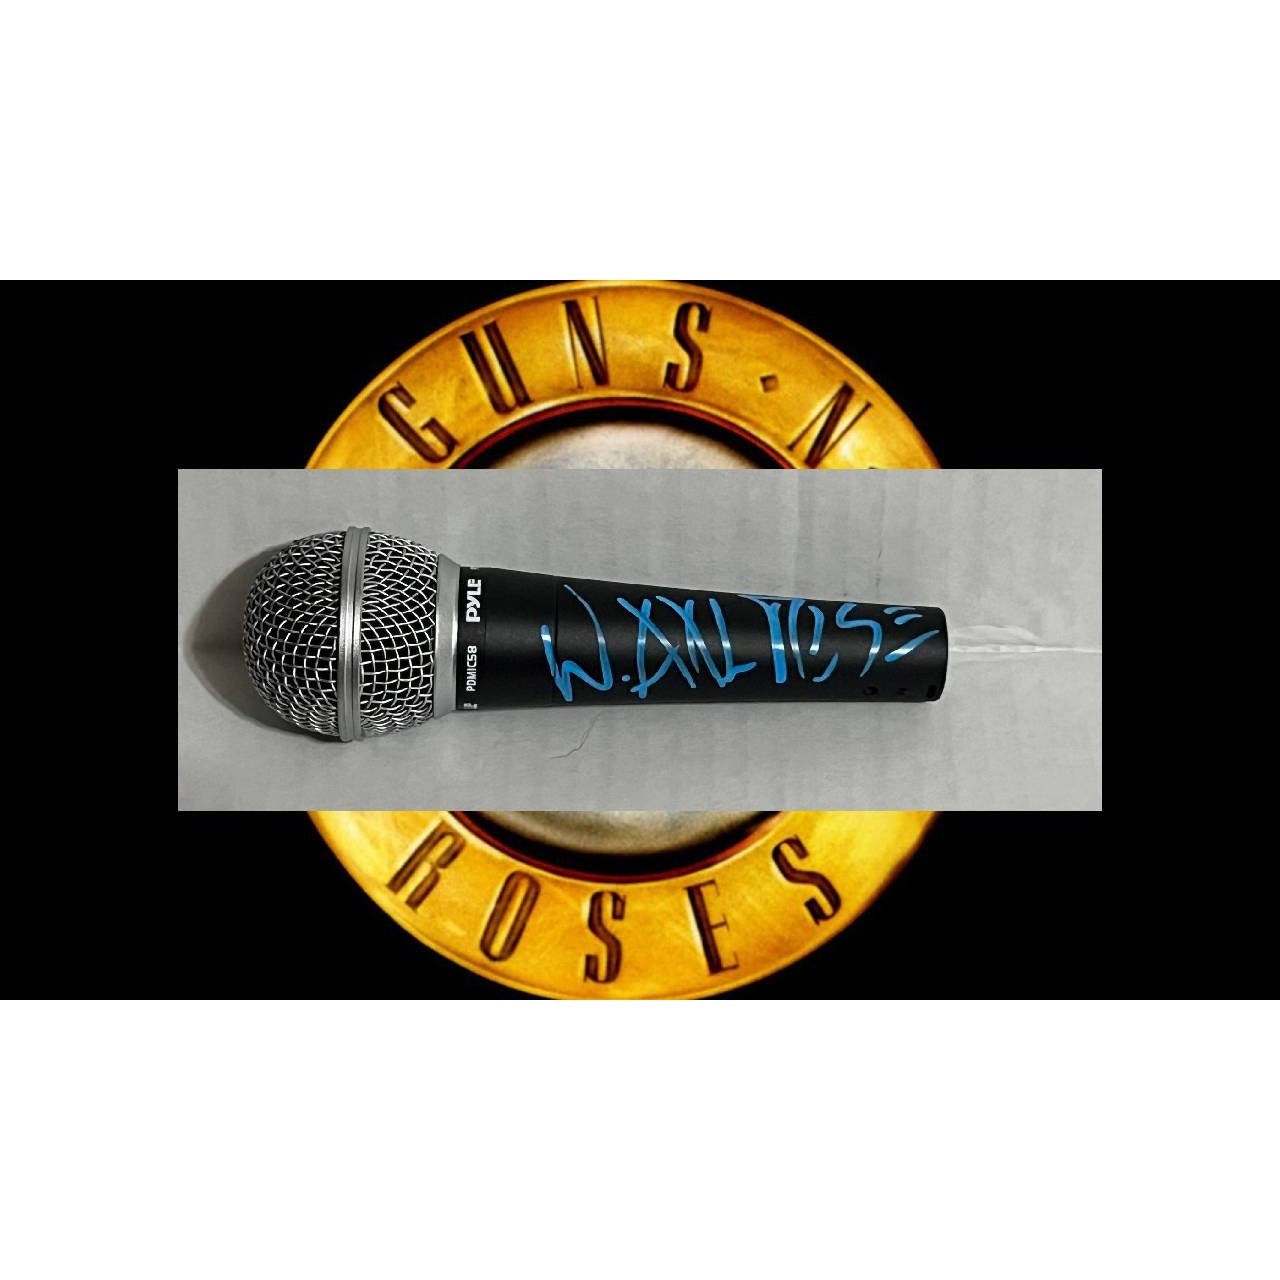 Guns n' roses W. axl rose microphone signed with proof